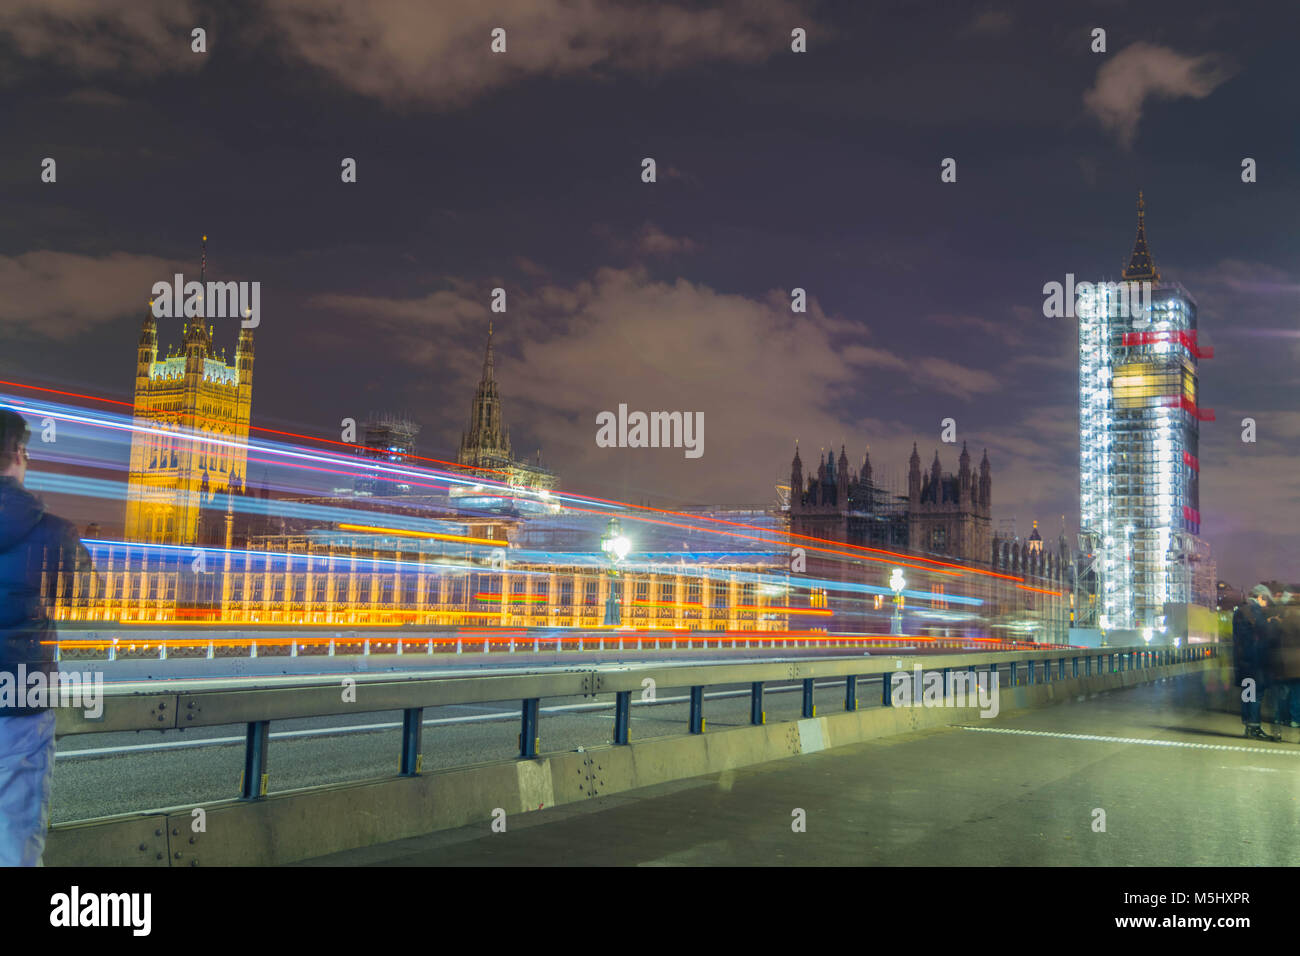 London, United Kingdom, February 17, 2018: long exposure shot of Westminster bridge and big ben renovation scaffolding construction with the house of parliament in view. Stock Photo